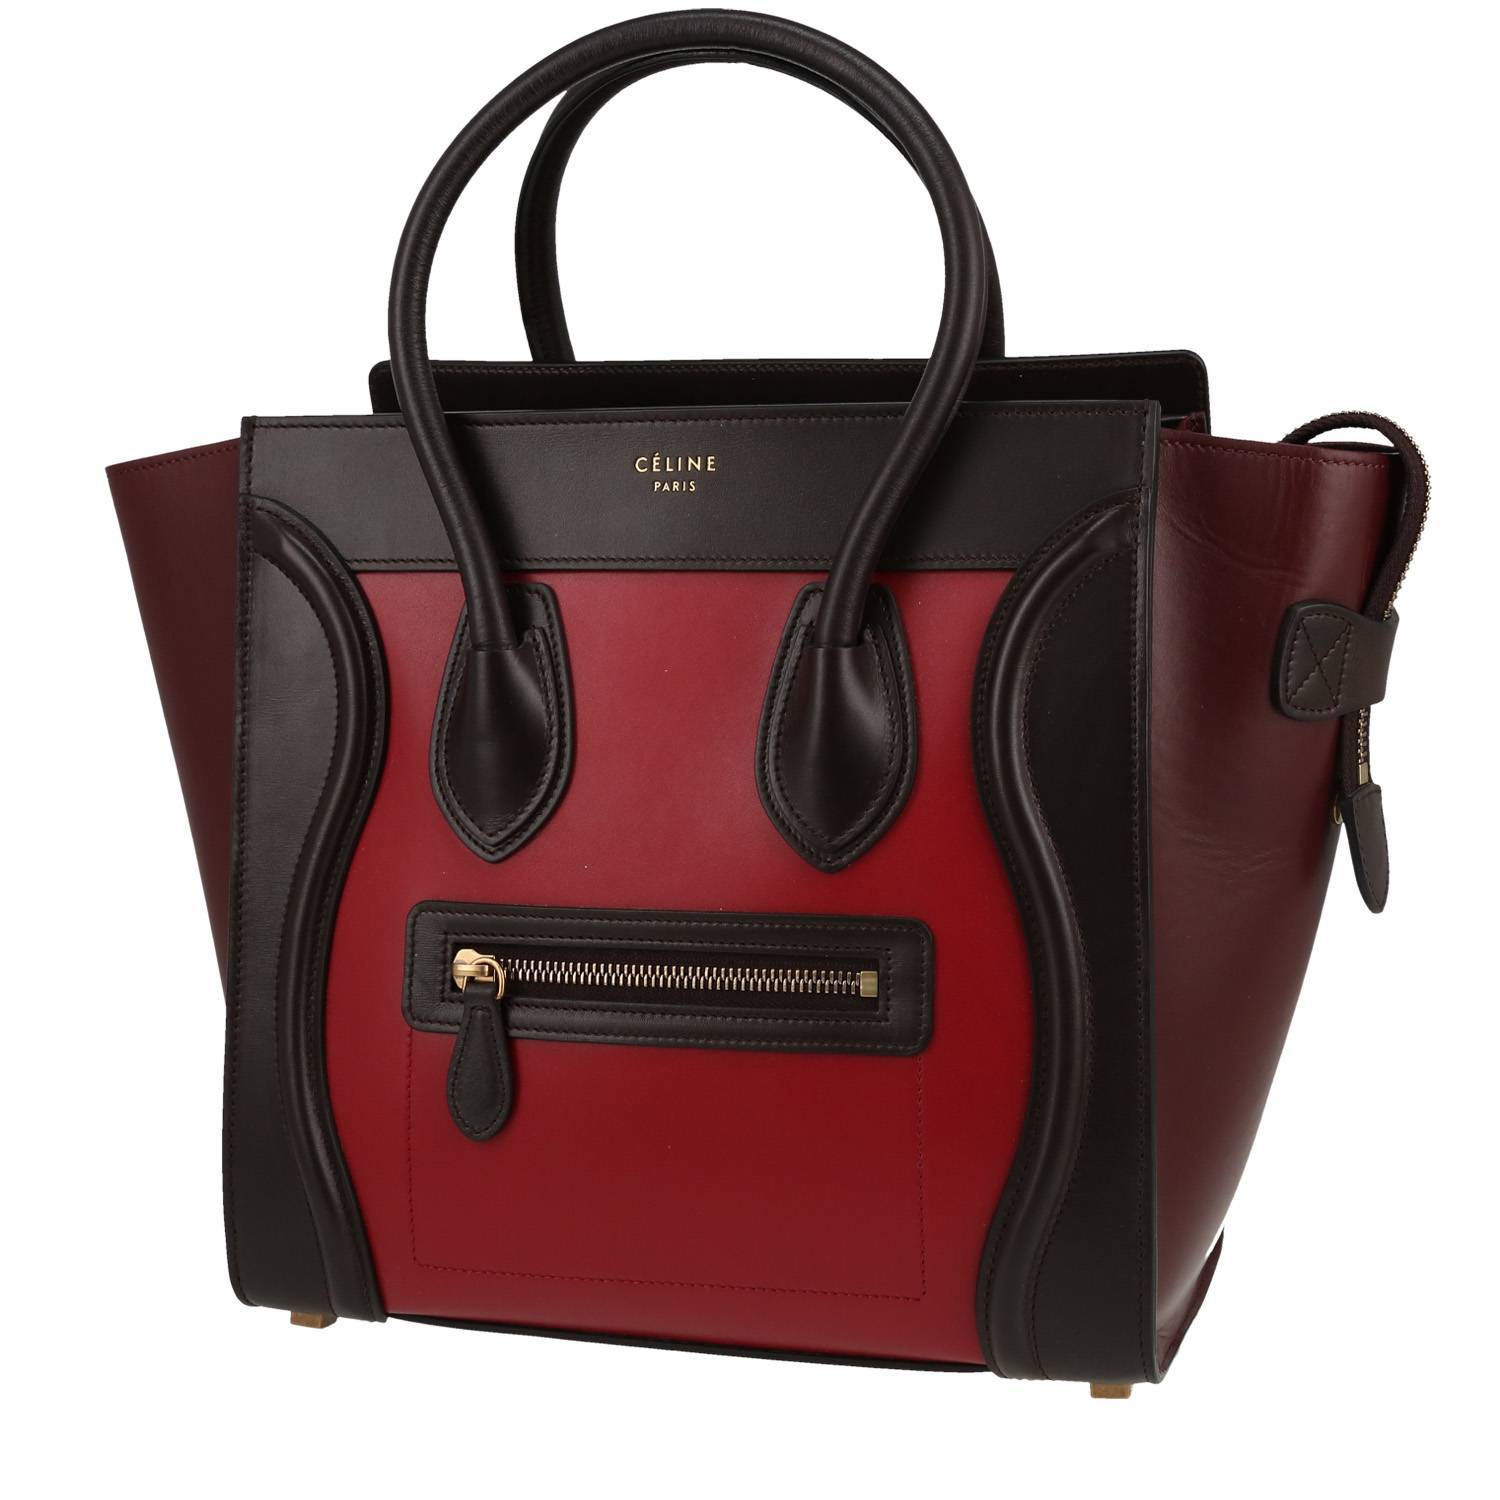 Luggage Micro Handbag In Black, And Leather